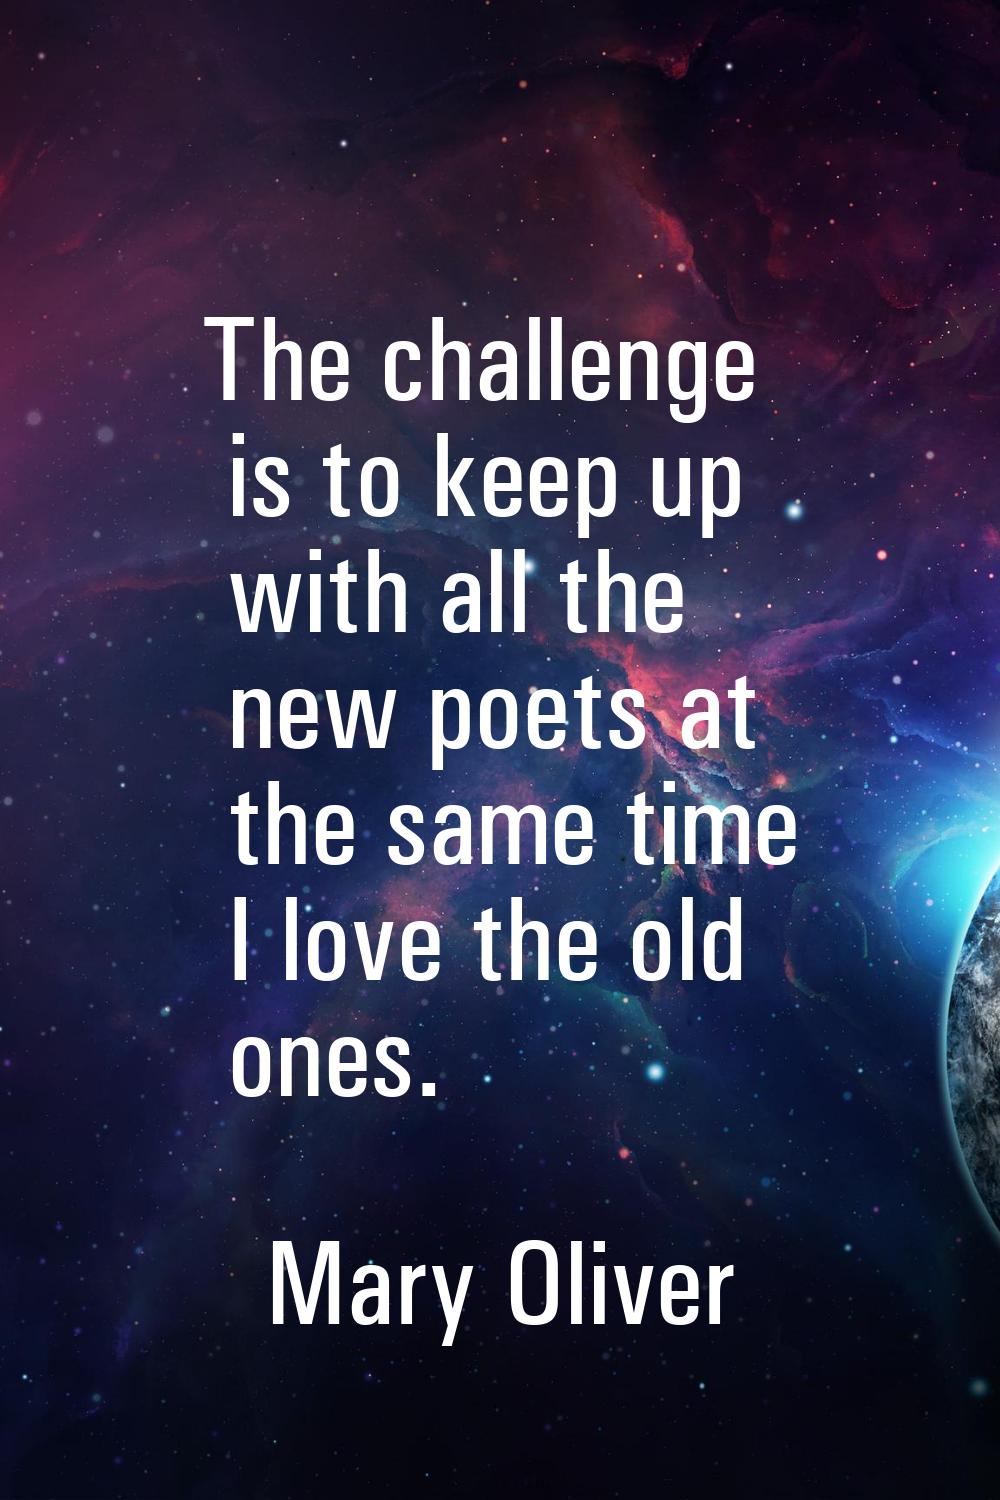 The challenge is to keep up with all the new poets at the same time I love the old ones.